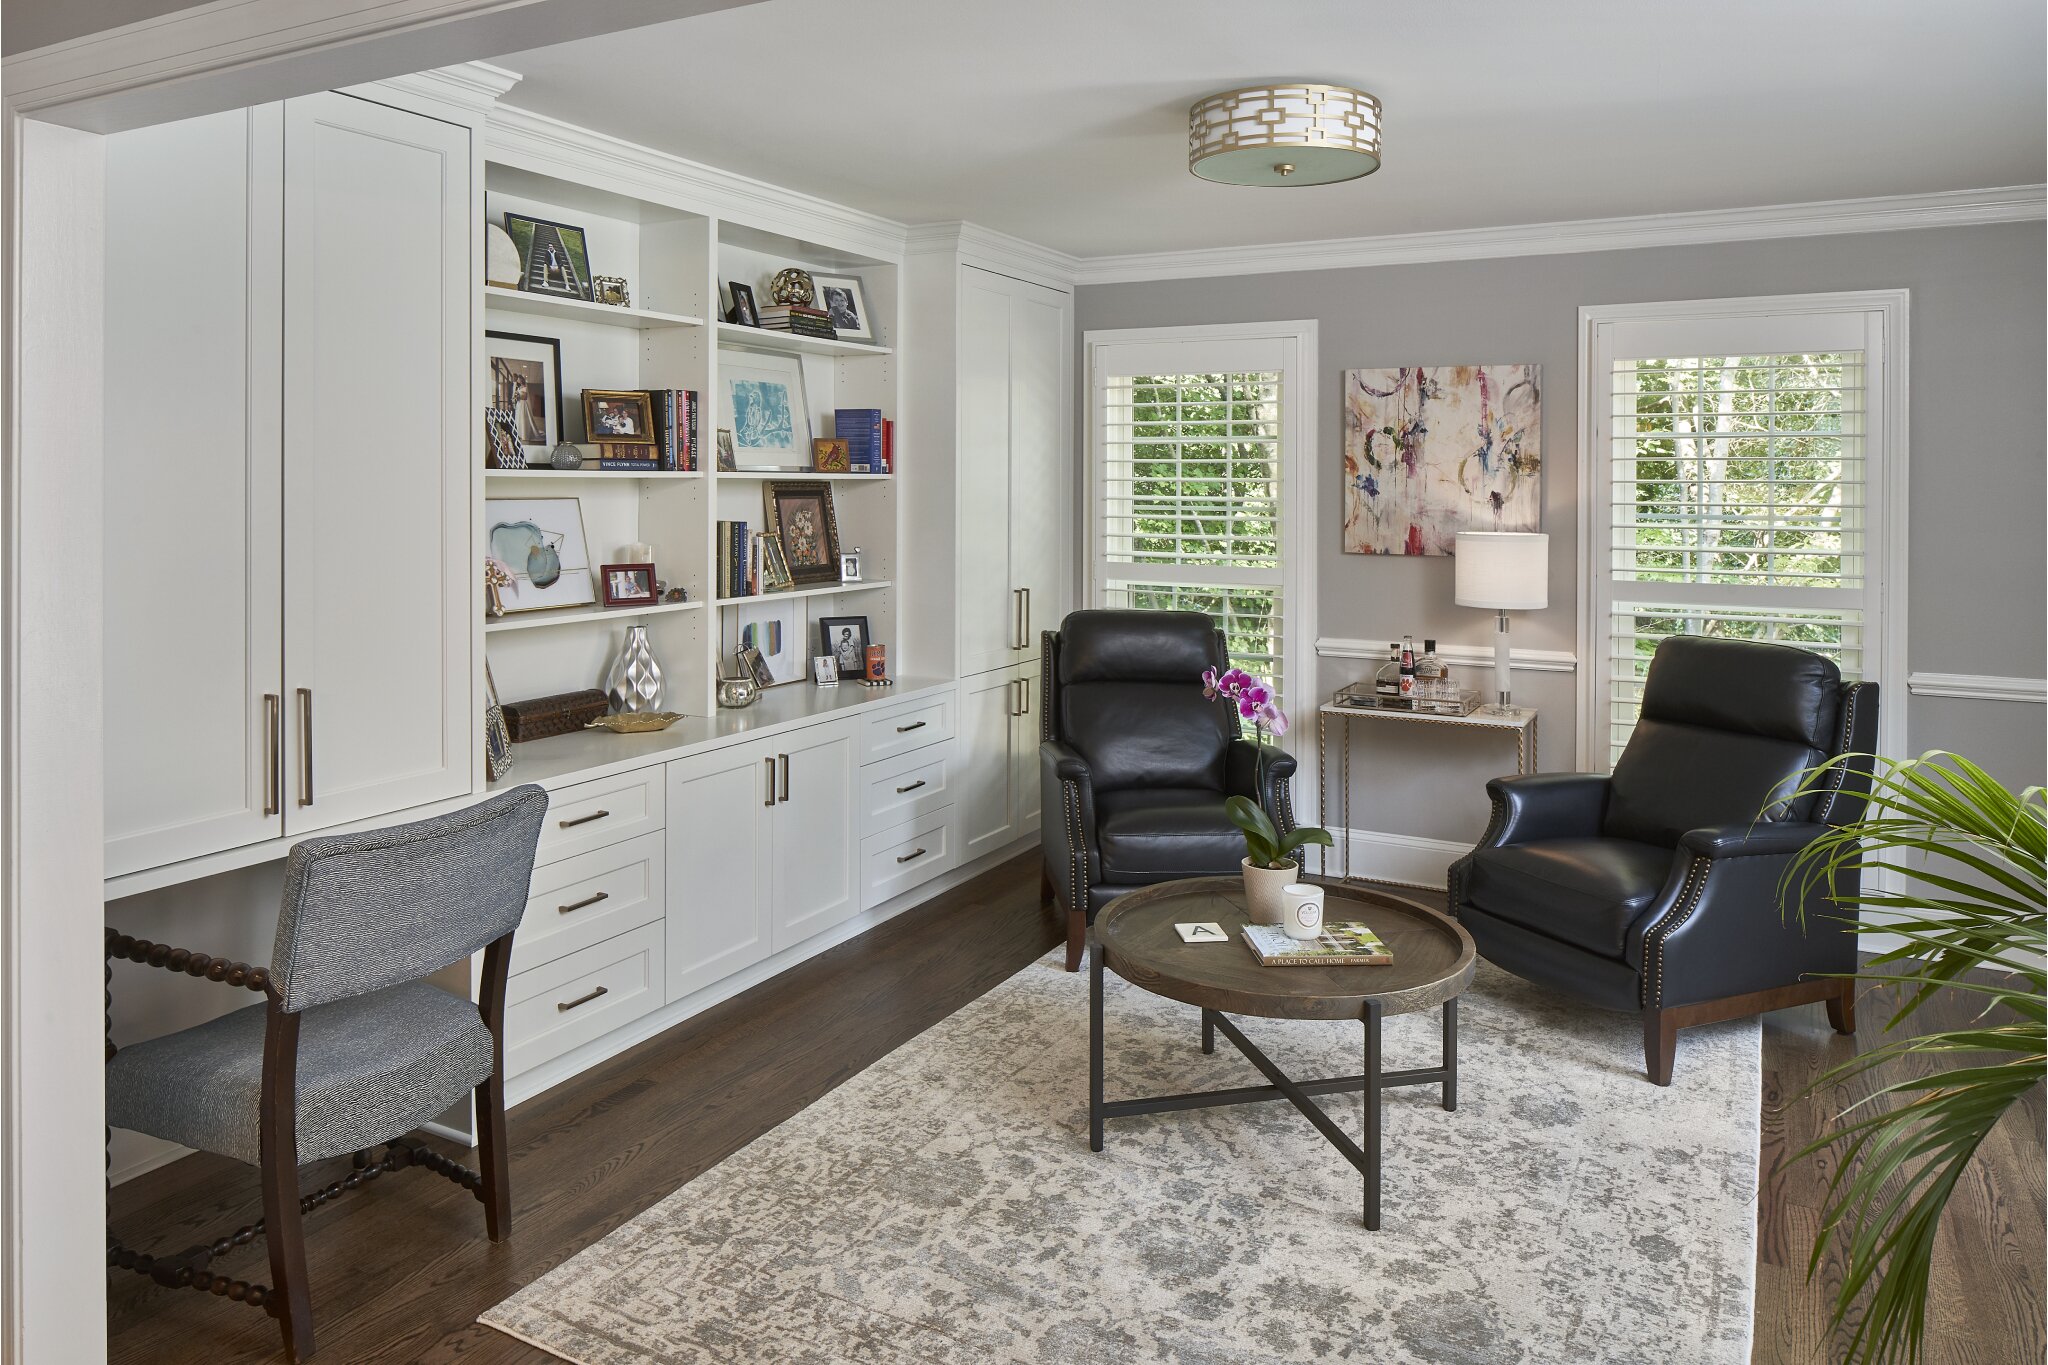 Renovated living room with large white custom cabinet and shelving built-in